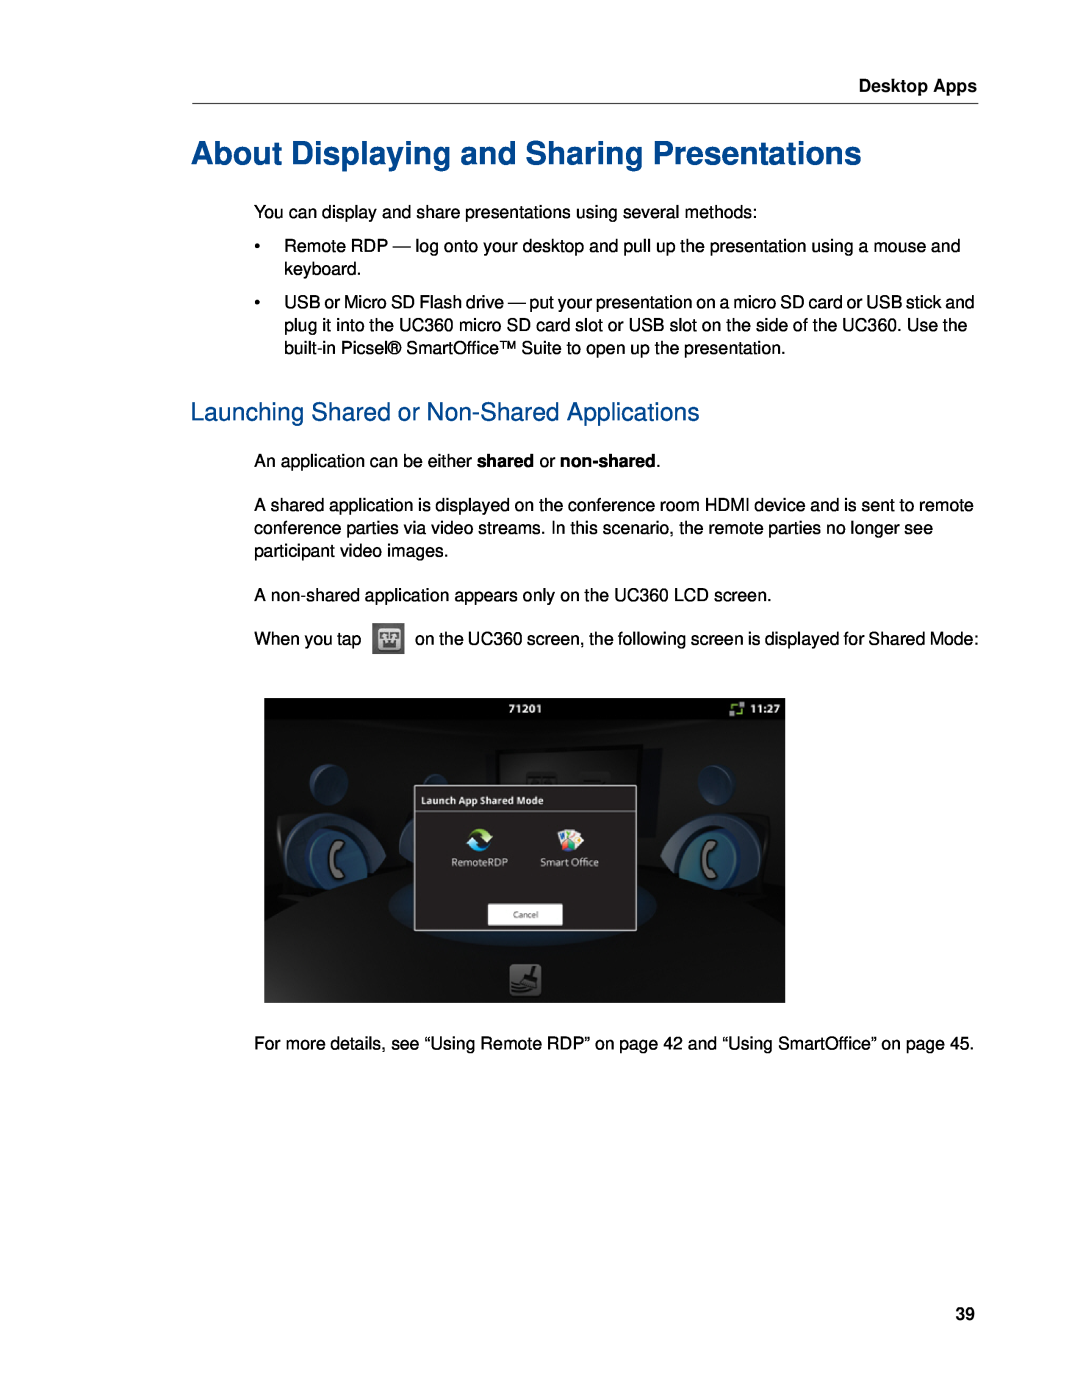 Mitel UC360 manual About Displaying and Sharing Presentations, Launching Shared or Non-Shared Applications, Desktop Apps 